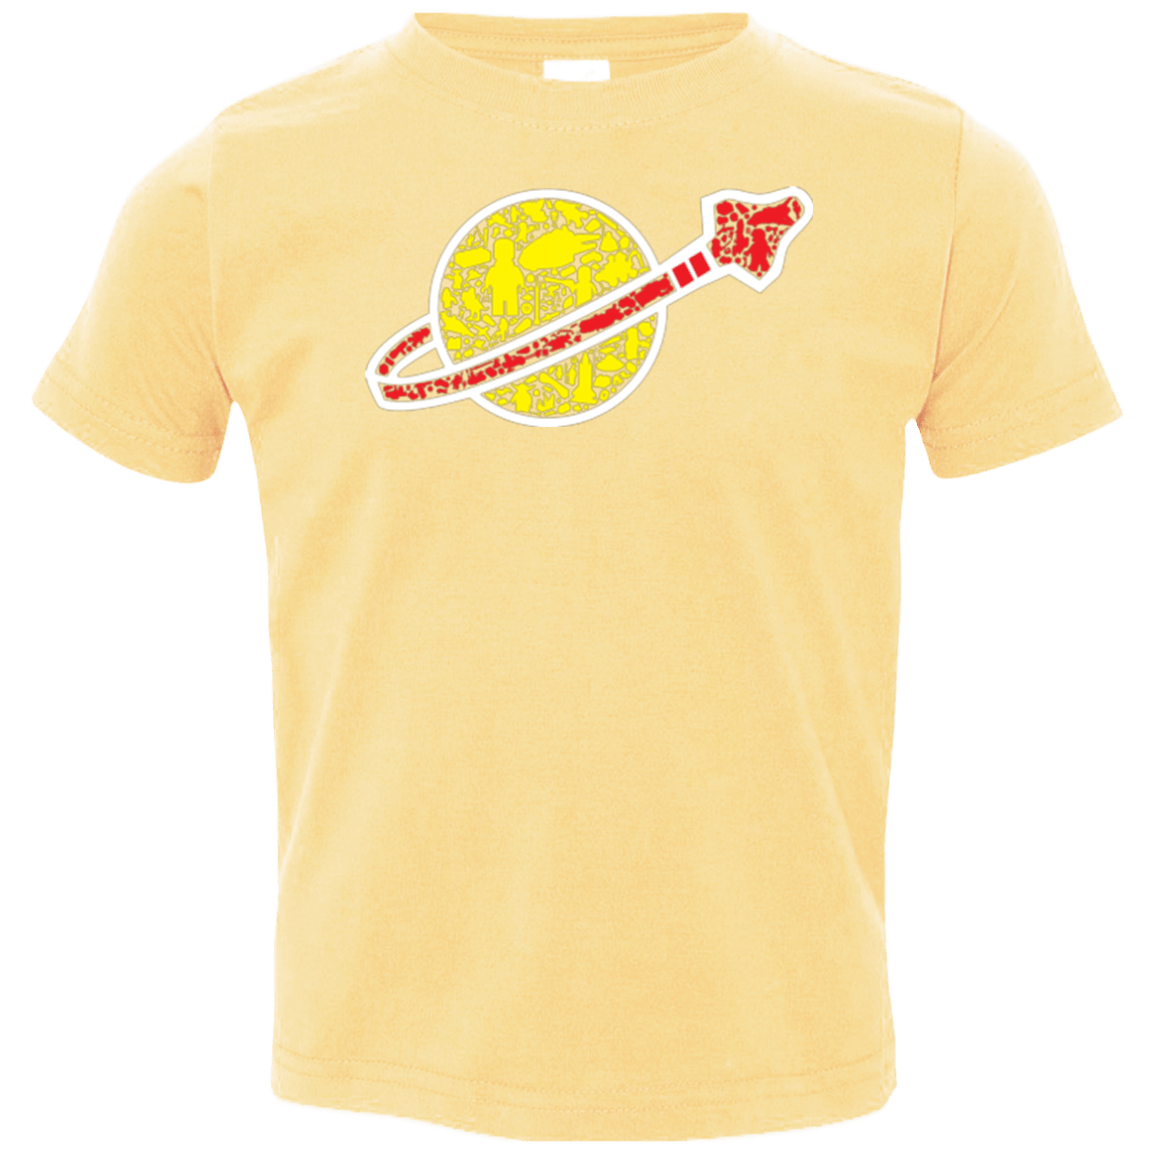 T-Shirts Butter / 2T Building in Space Toddler Premium T-Shirt